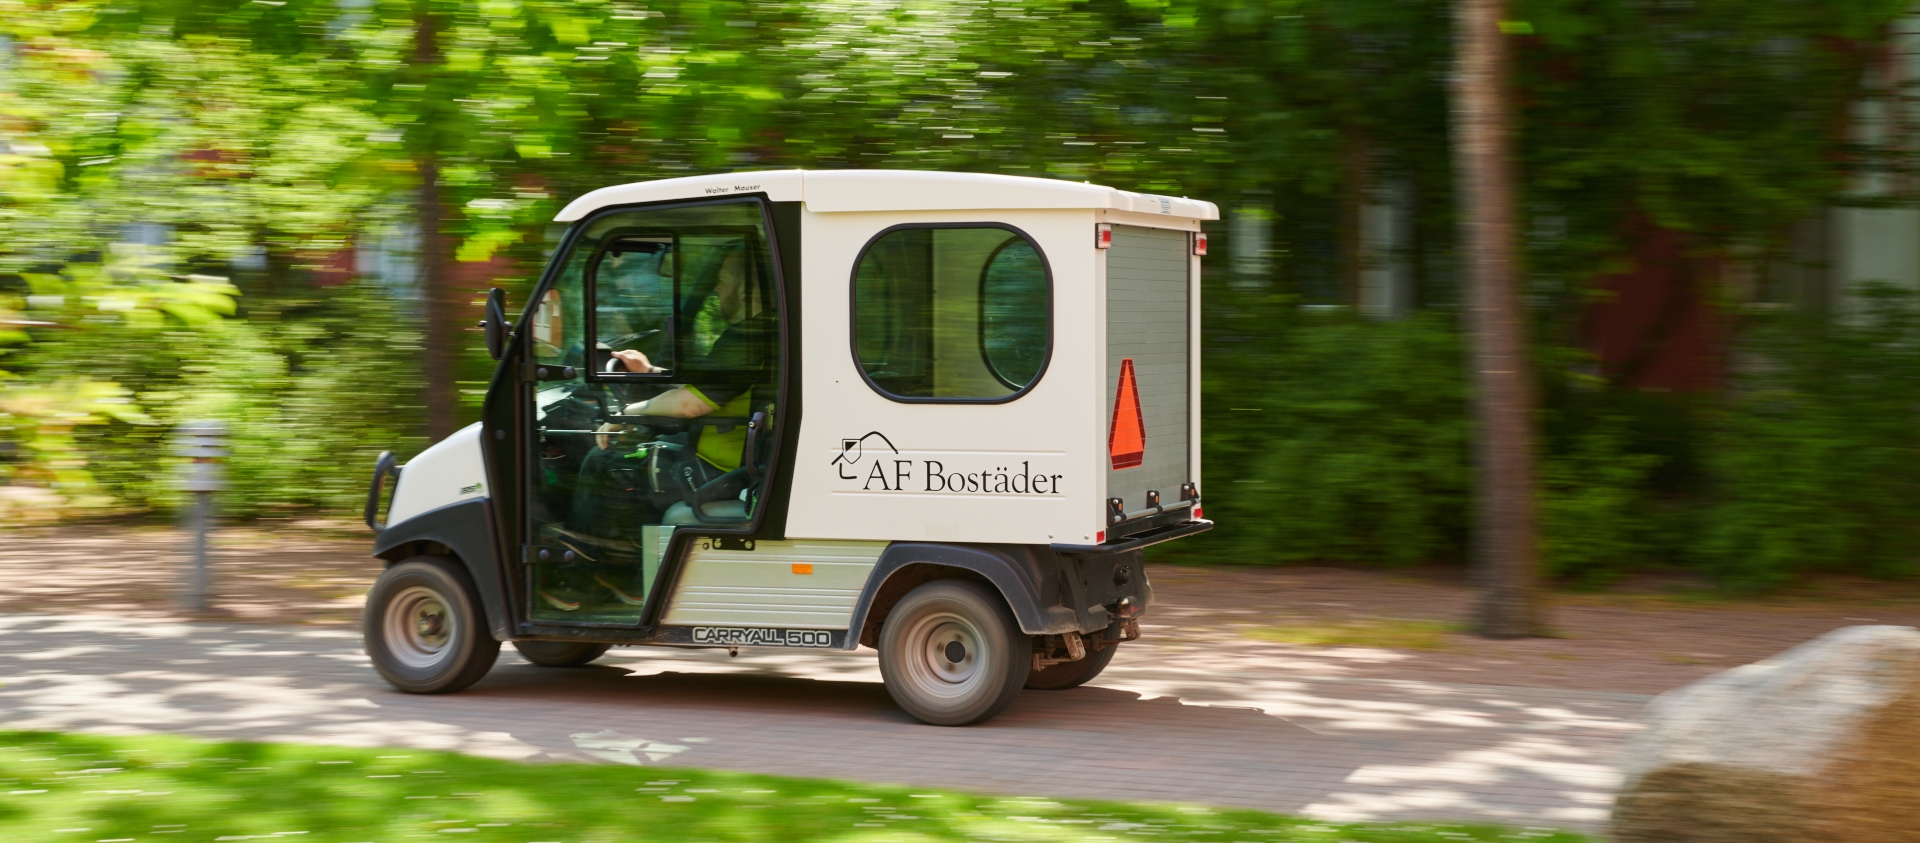 One of AF Bostäder's small electric cars are driving by on a small road surrounded by trees and grass.